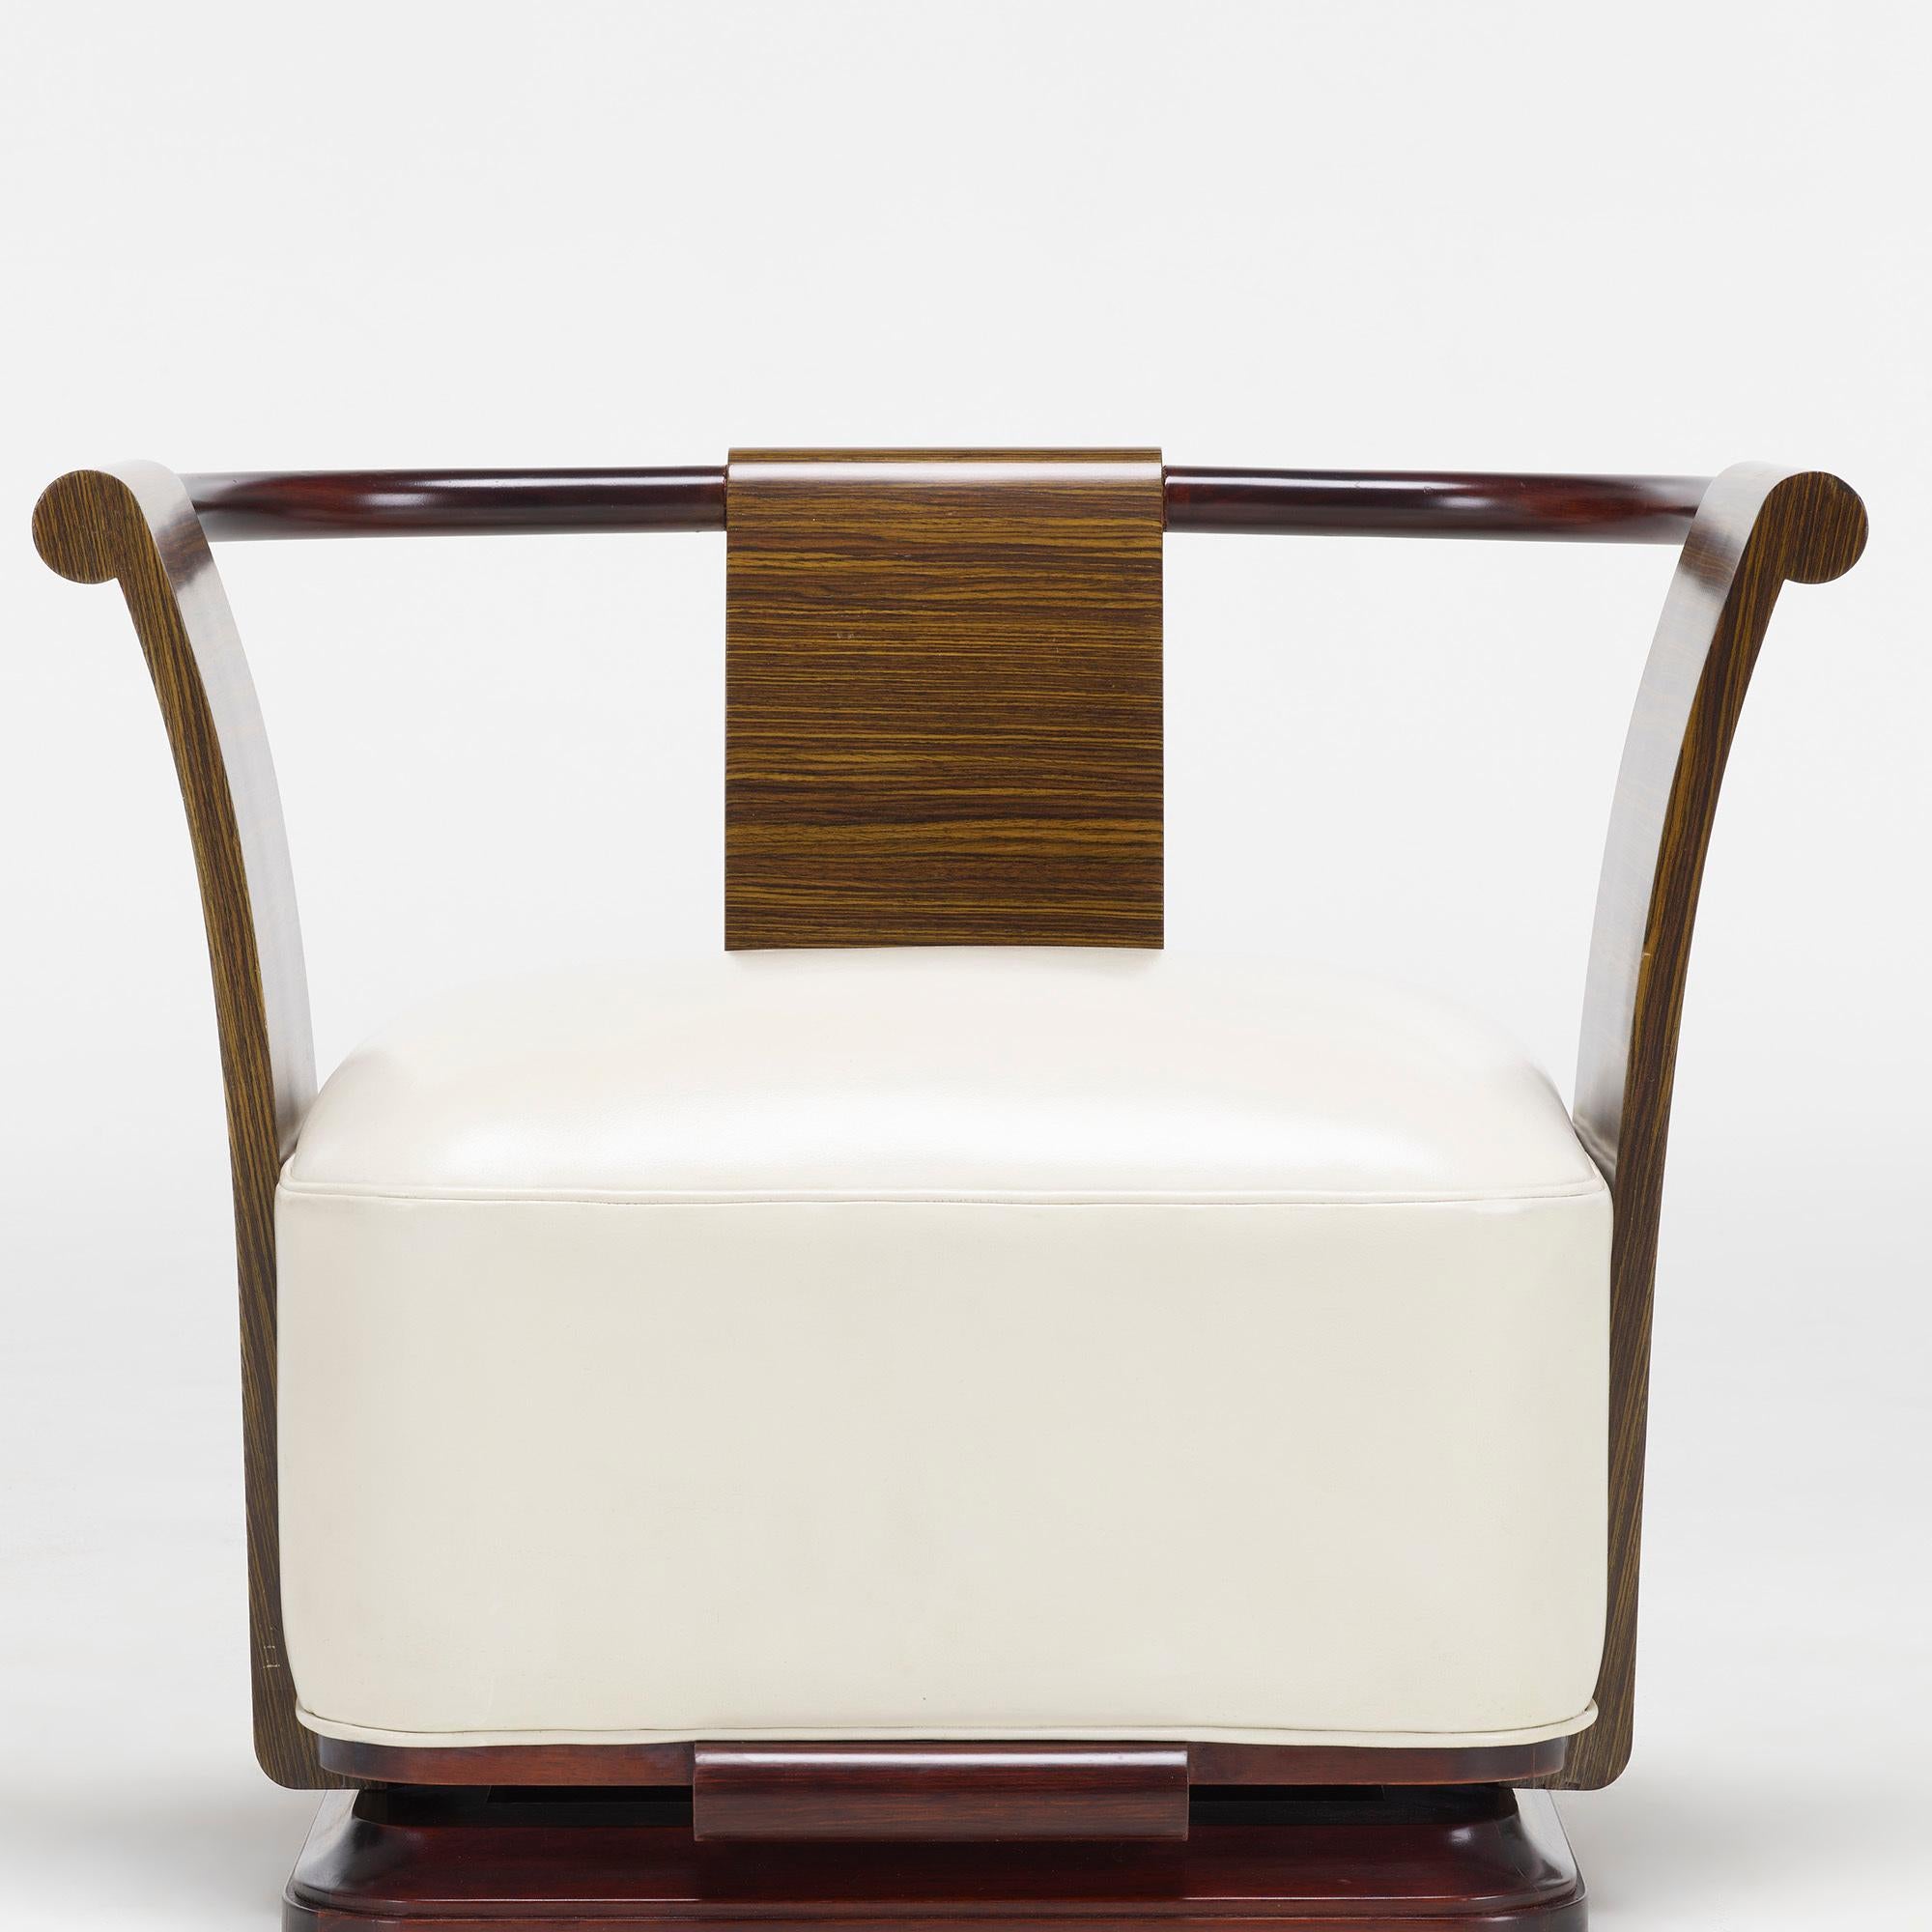 Pair of Simone chairs by William Stuart

Made by Costantini, United States, 2009

Material: Engineered macassar ebony, walnut, rosewood, leather

Size: 31.25 W × 23.5 D × 25 H Inches.

